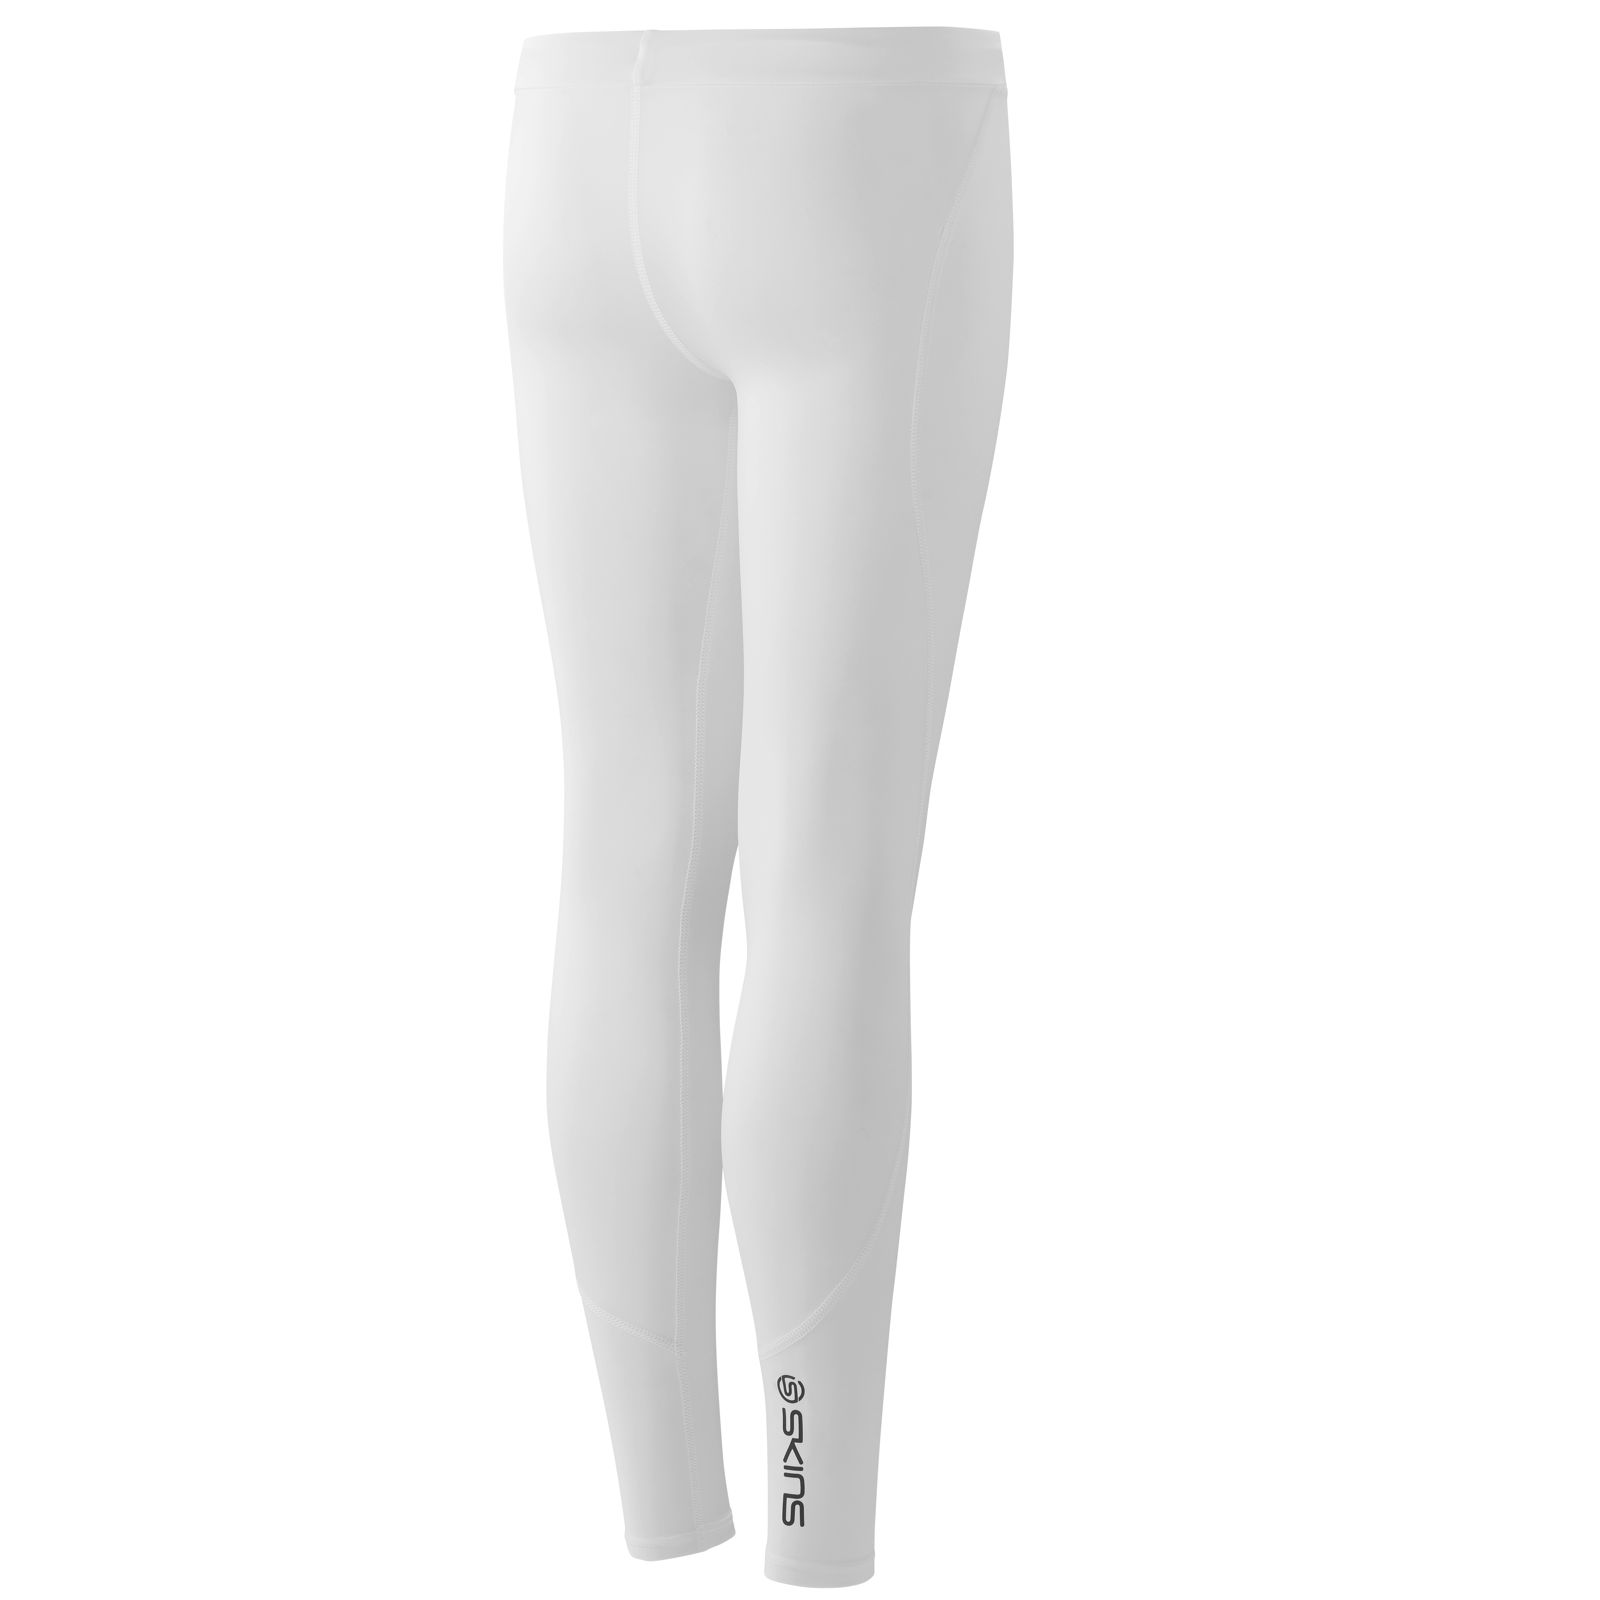 SKINS SERIES-1 YOUTH LONG TIGHTS WHITE - SKINS Compression Europe